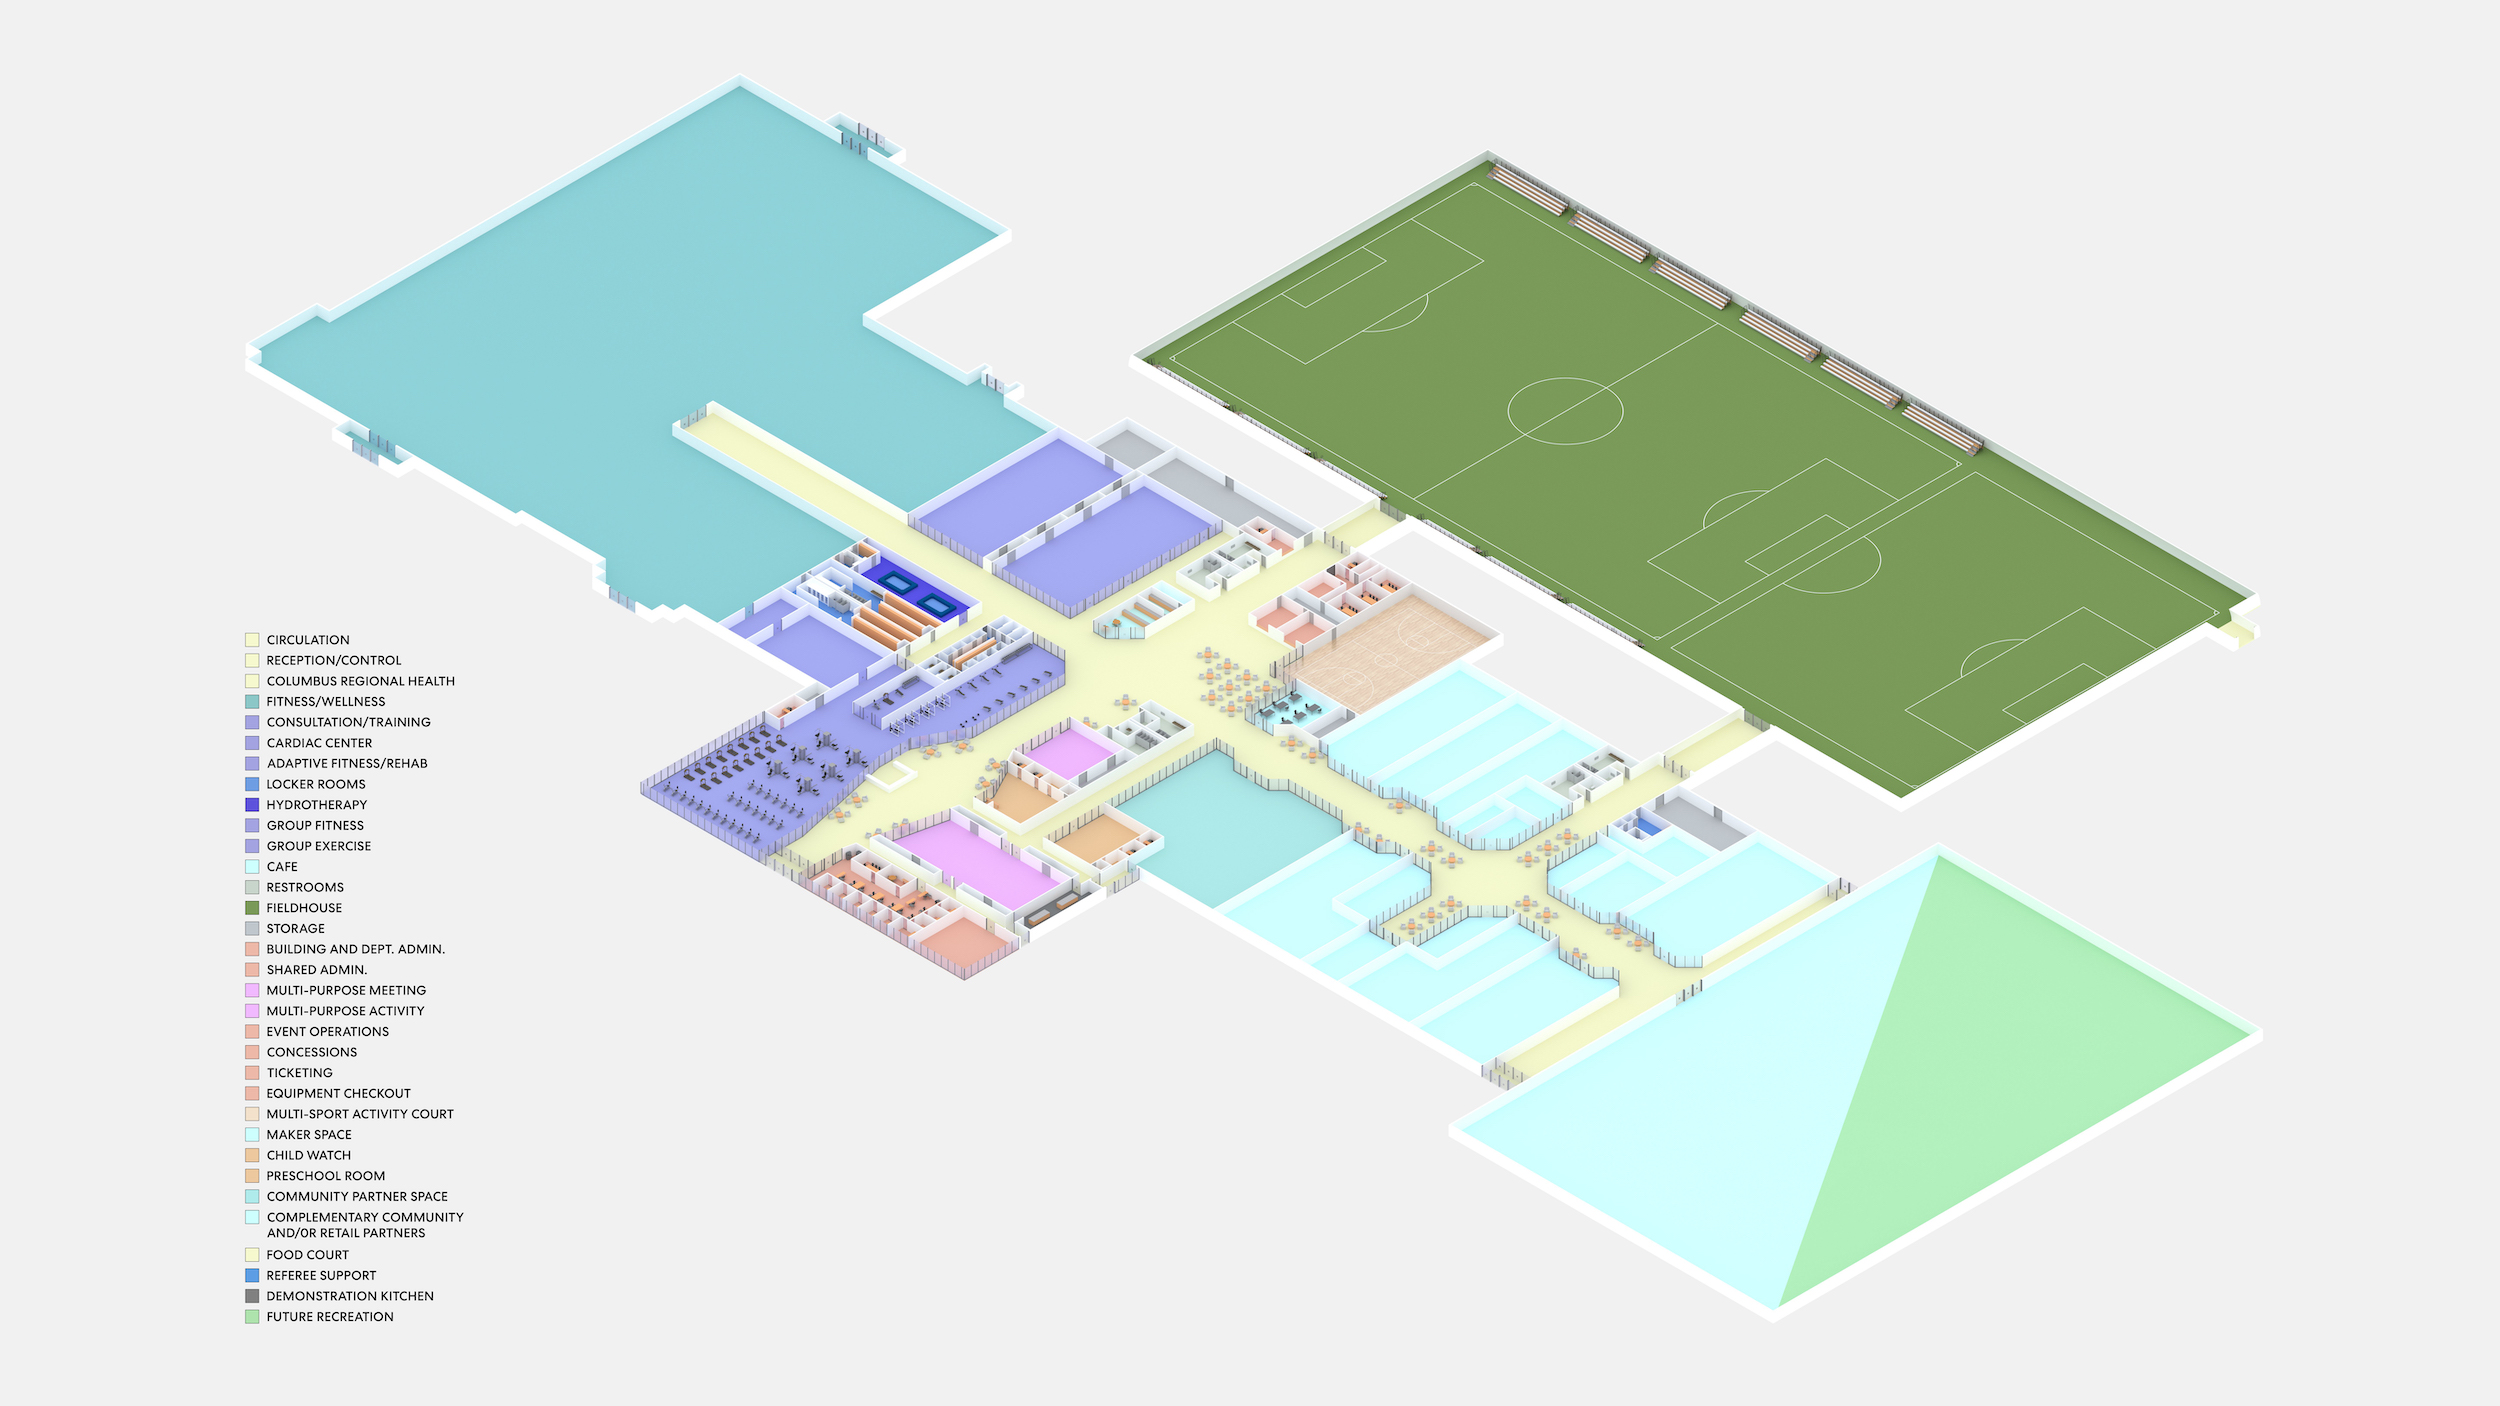 site plan of a mall-turned-health facility